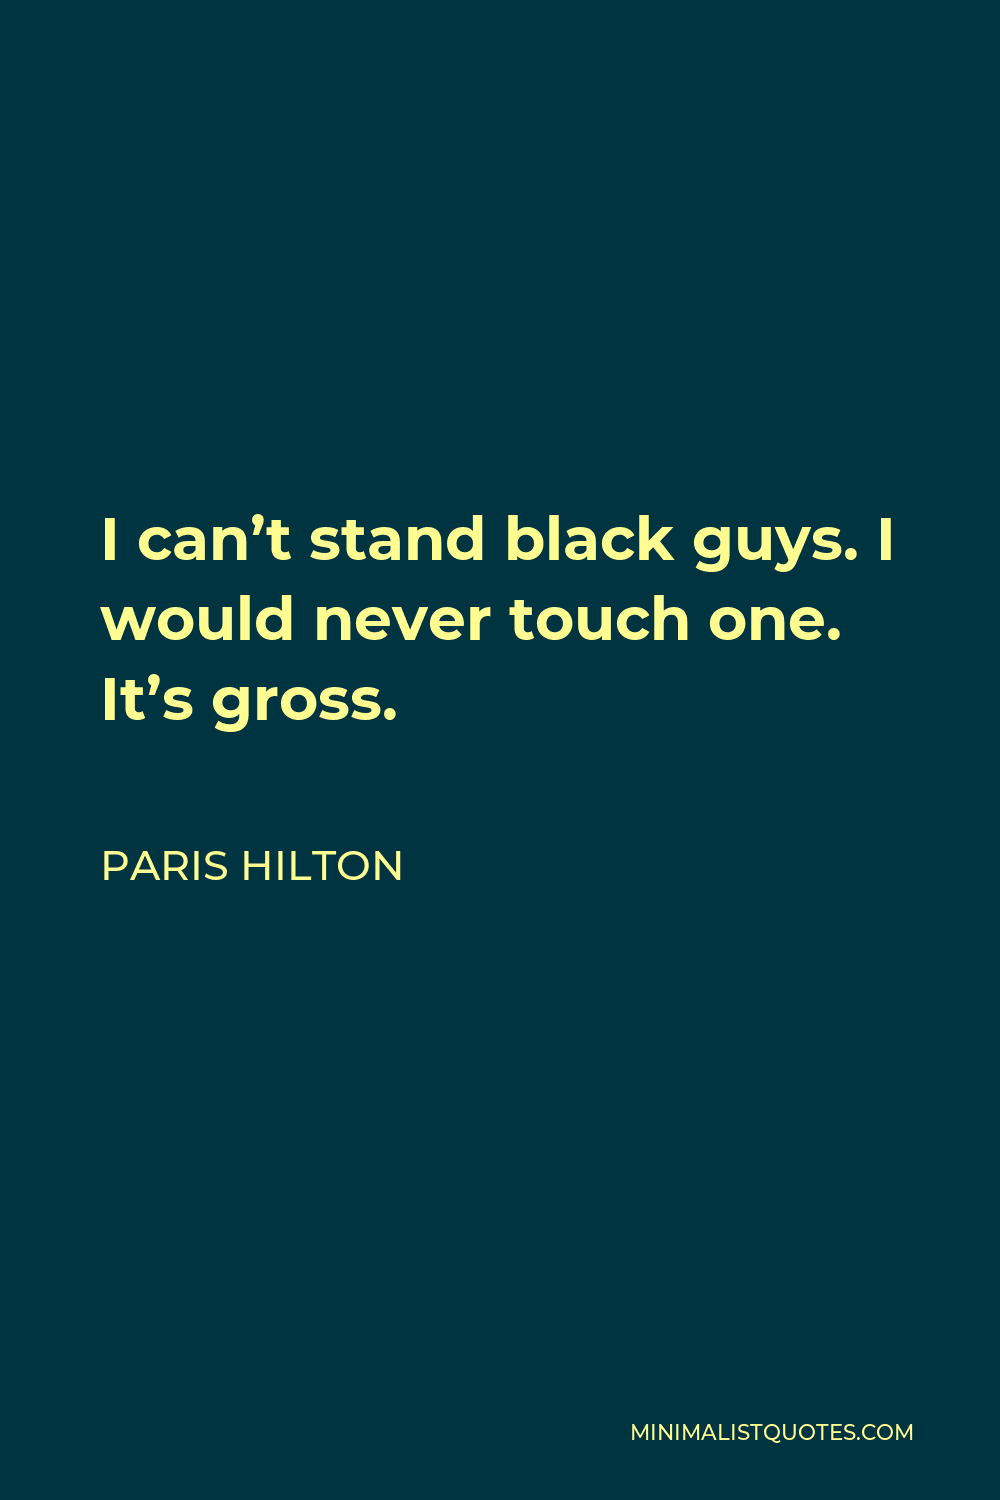 Paris Hilton Quote - I can’t stand black guys. I would never touch one. It’s gross.